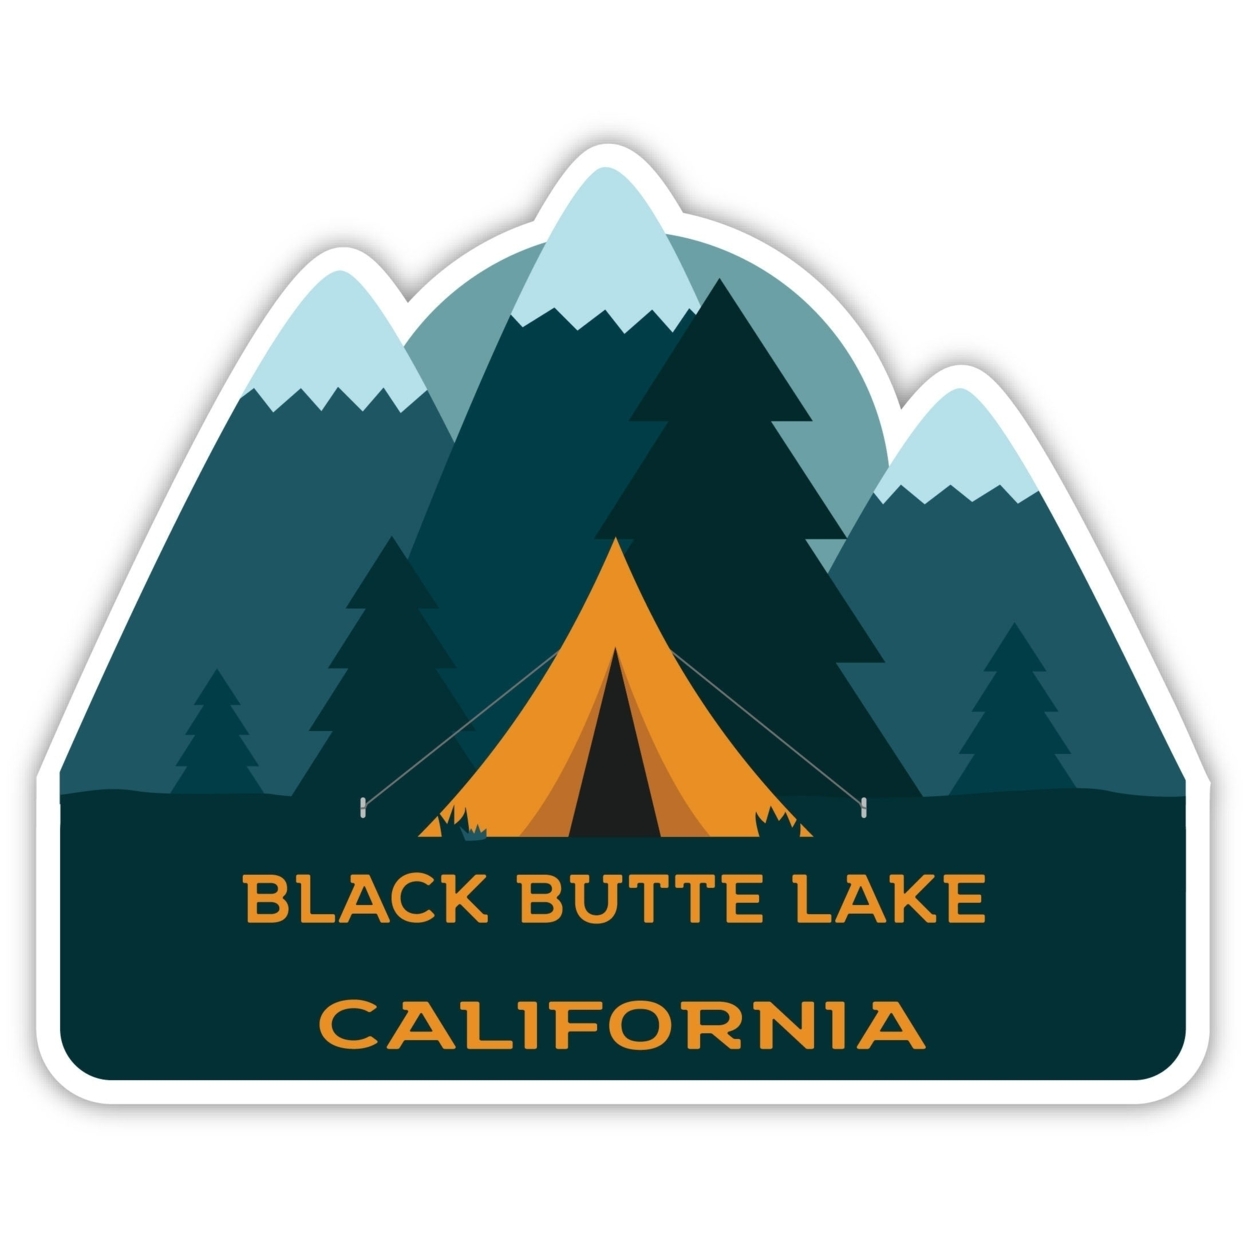 Black Butte Lake California Souvenir Decorative Stickers (Choose Theme And Size) - 4-Pack, 2-Inch, Tent